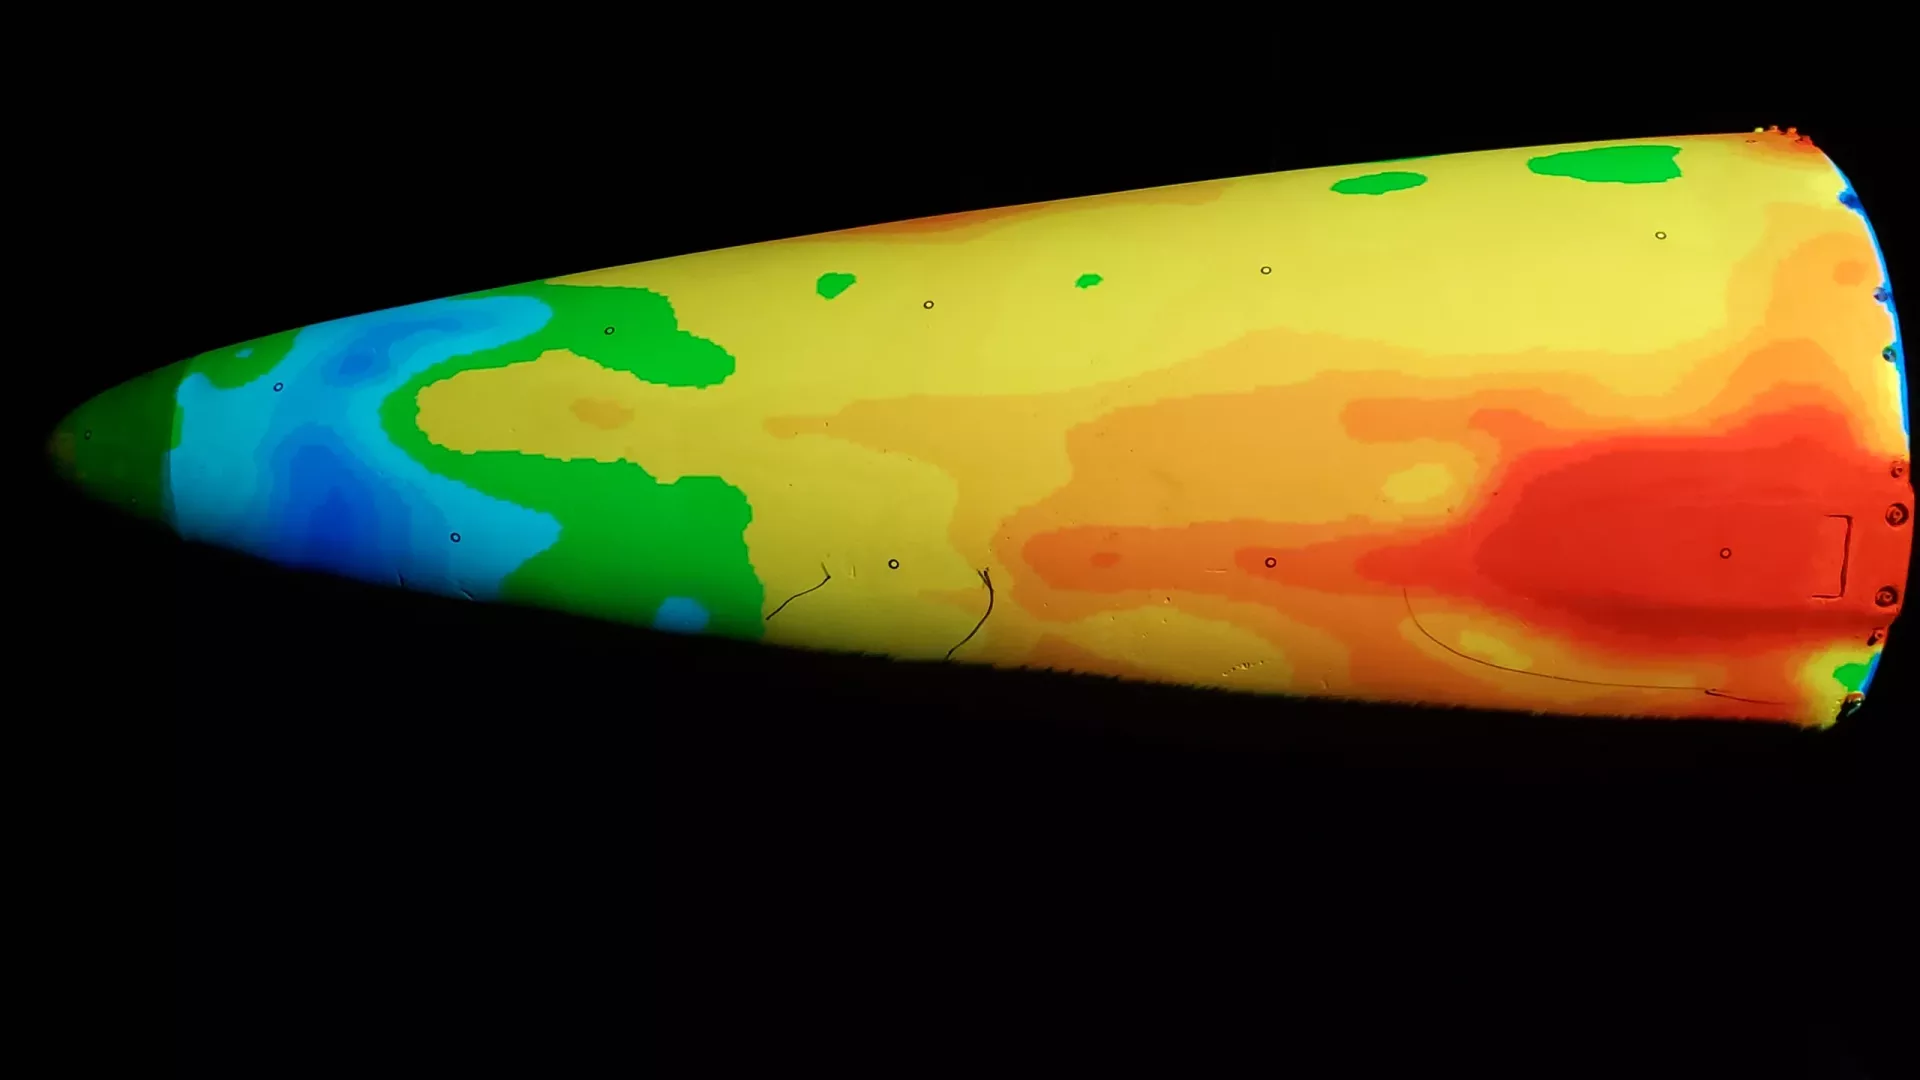 An automated inspection system, using metrology, projects a color-devatied map on a missile shroud to determine high and low spots.